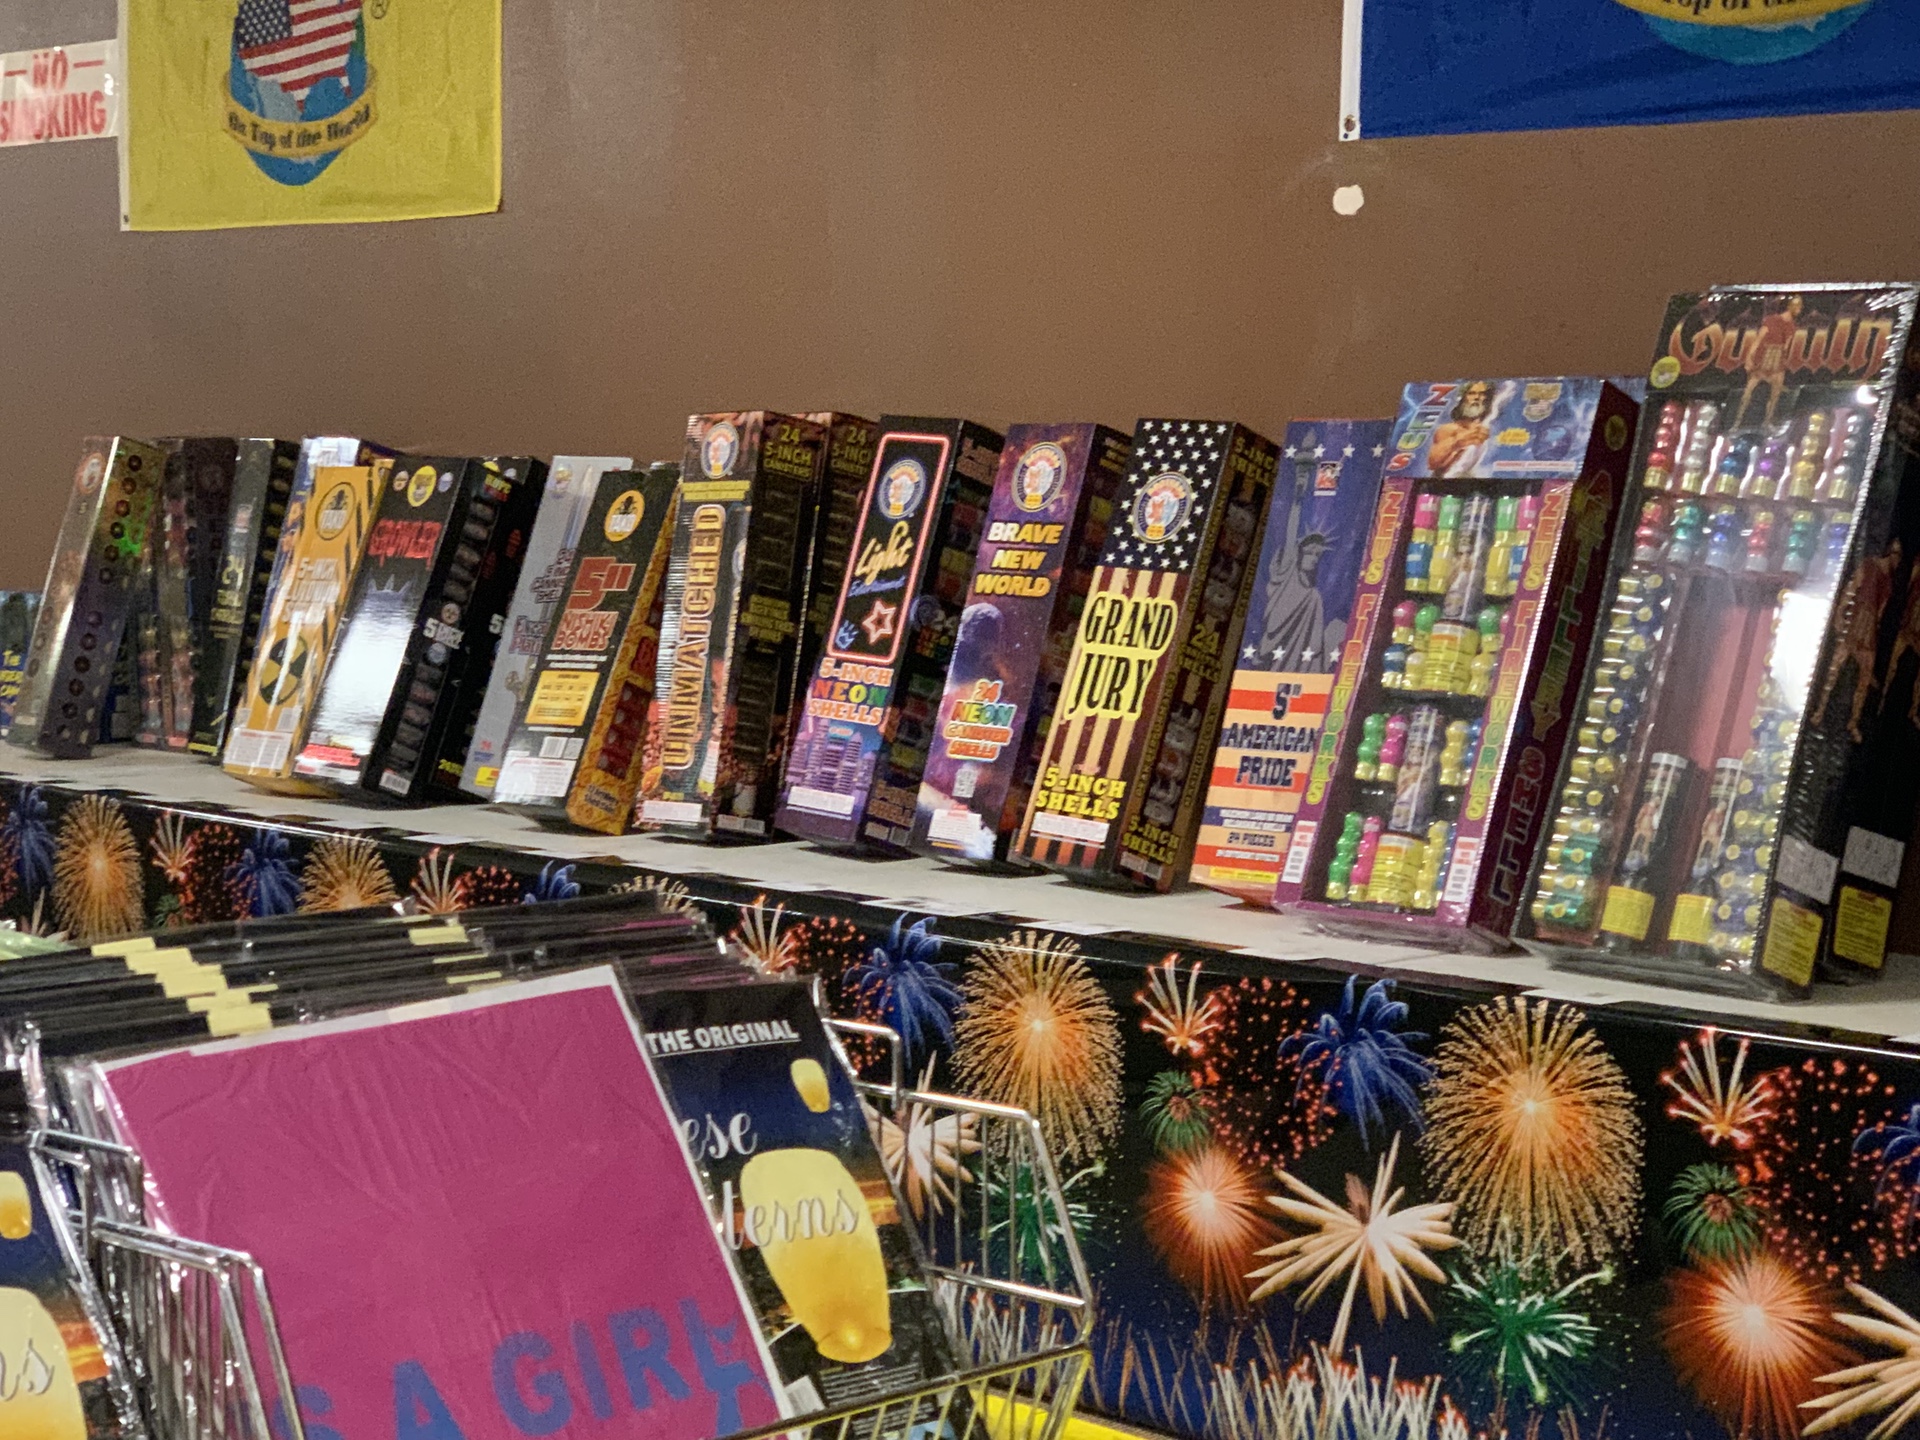 Retail product on the shelves at Indy Fireworks